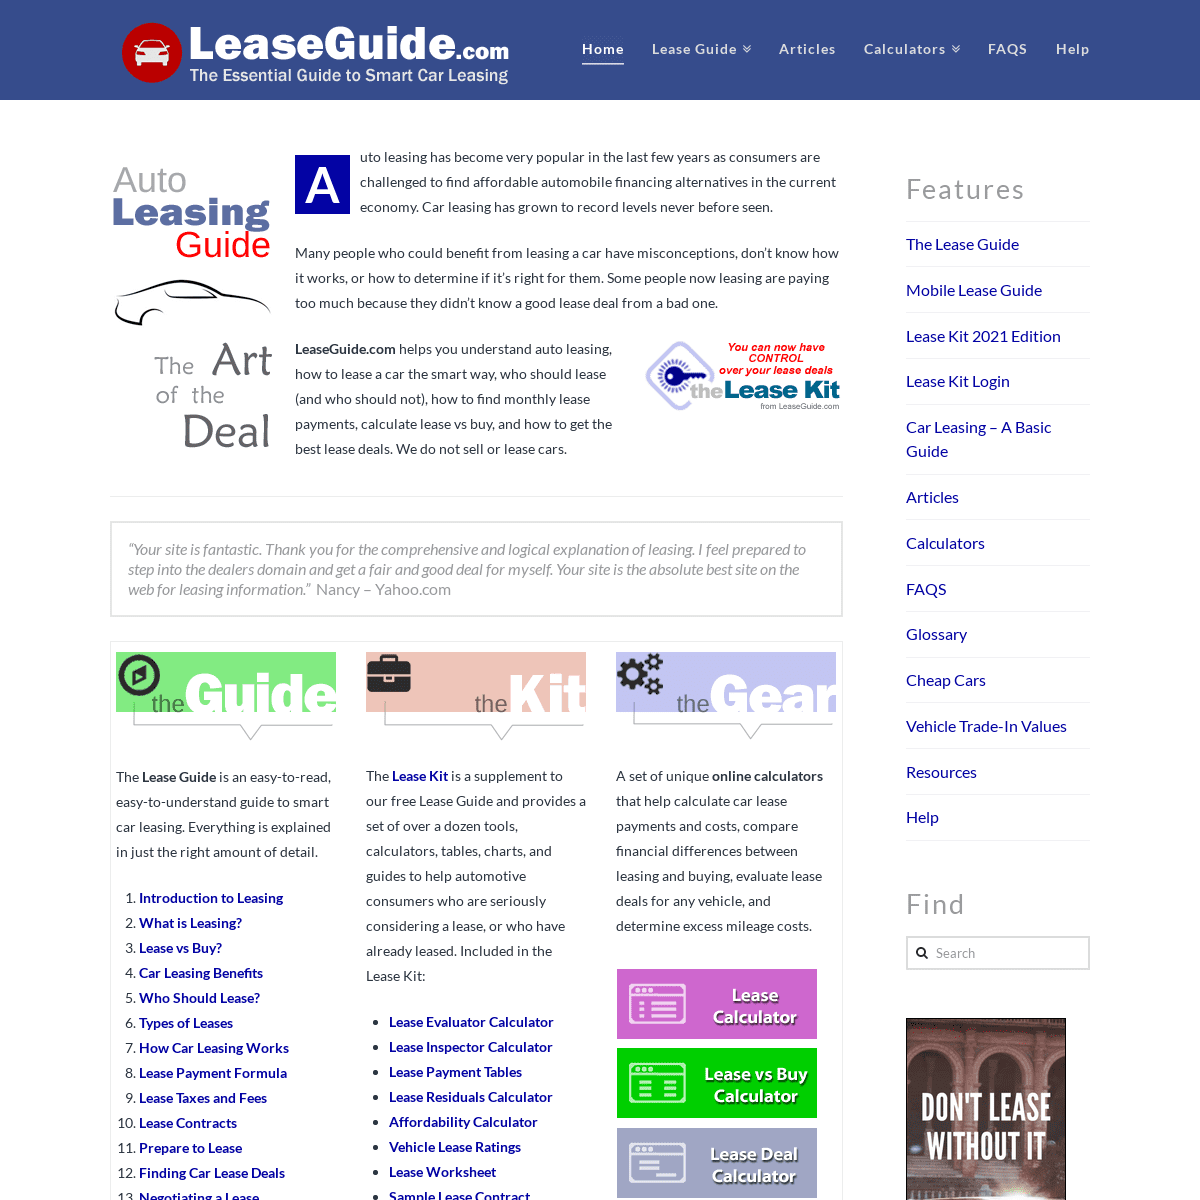 A complete backup of https://leaseguide.com